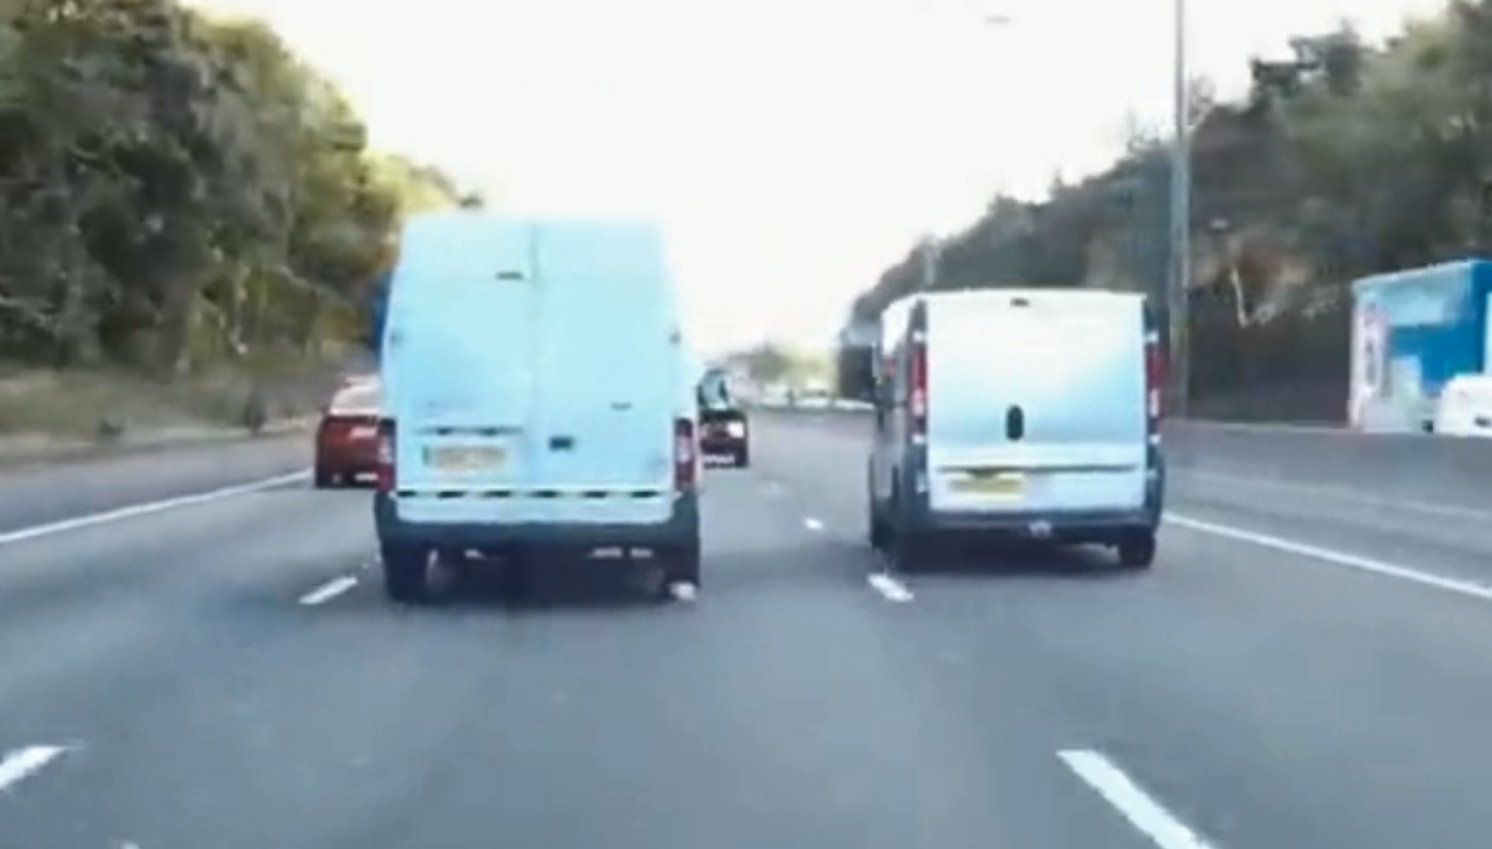 The vans almost crashed after what has been described as an 'irresponsible stunt'